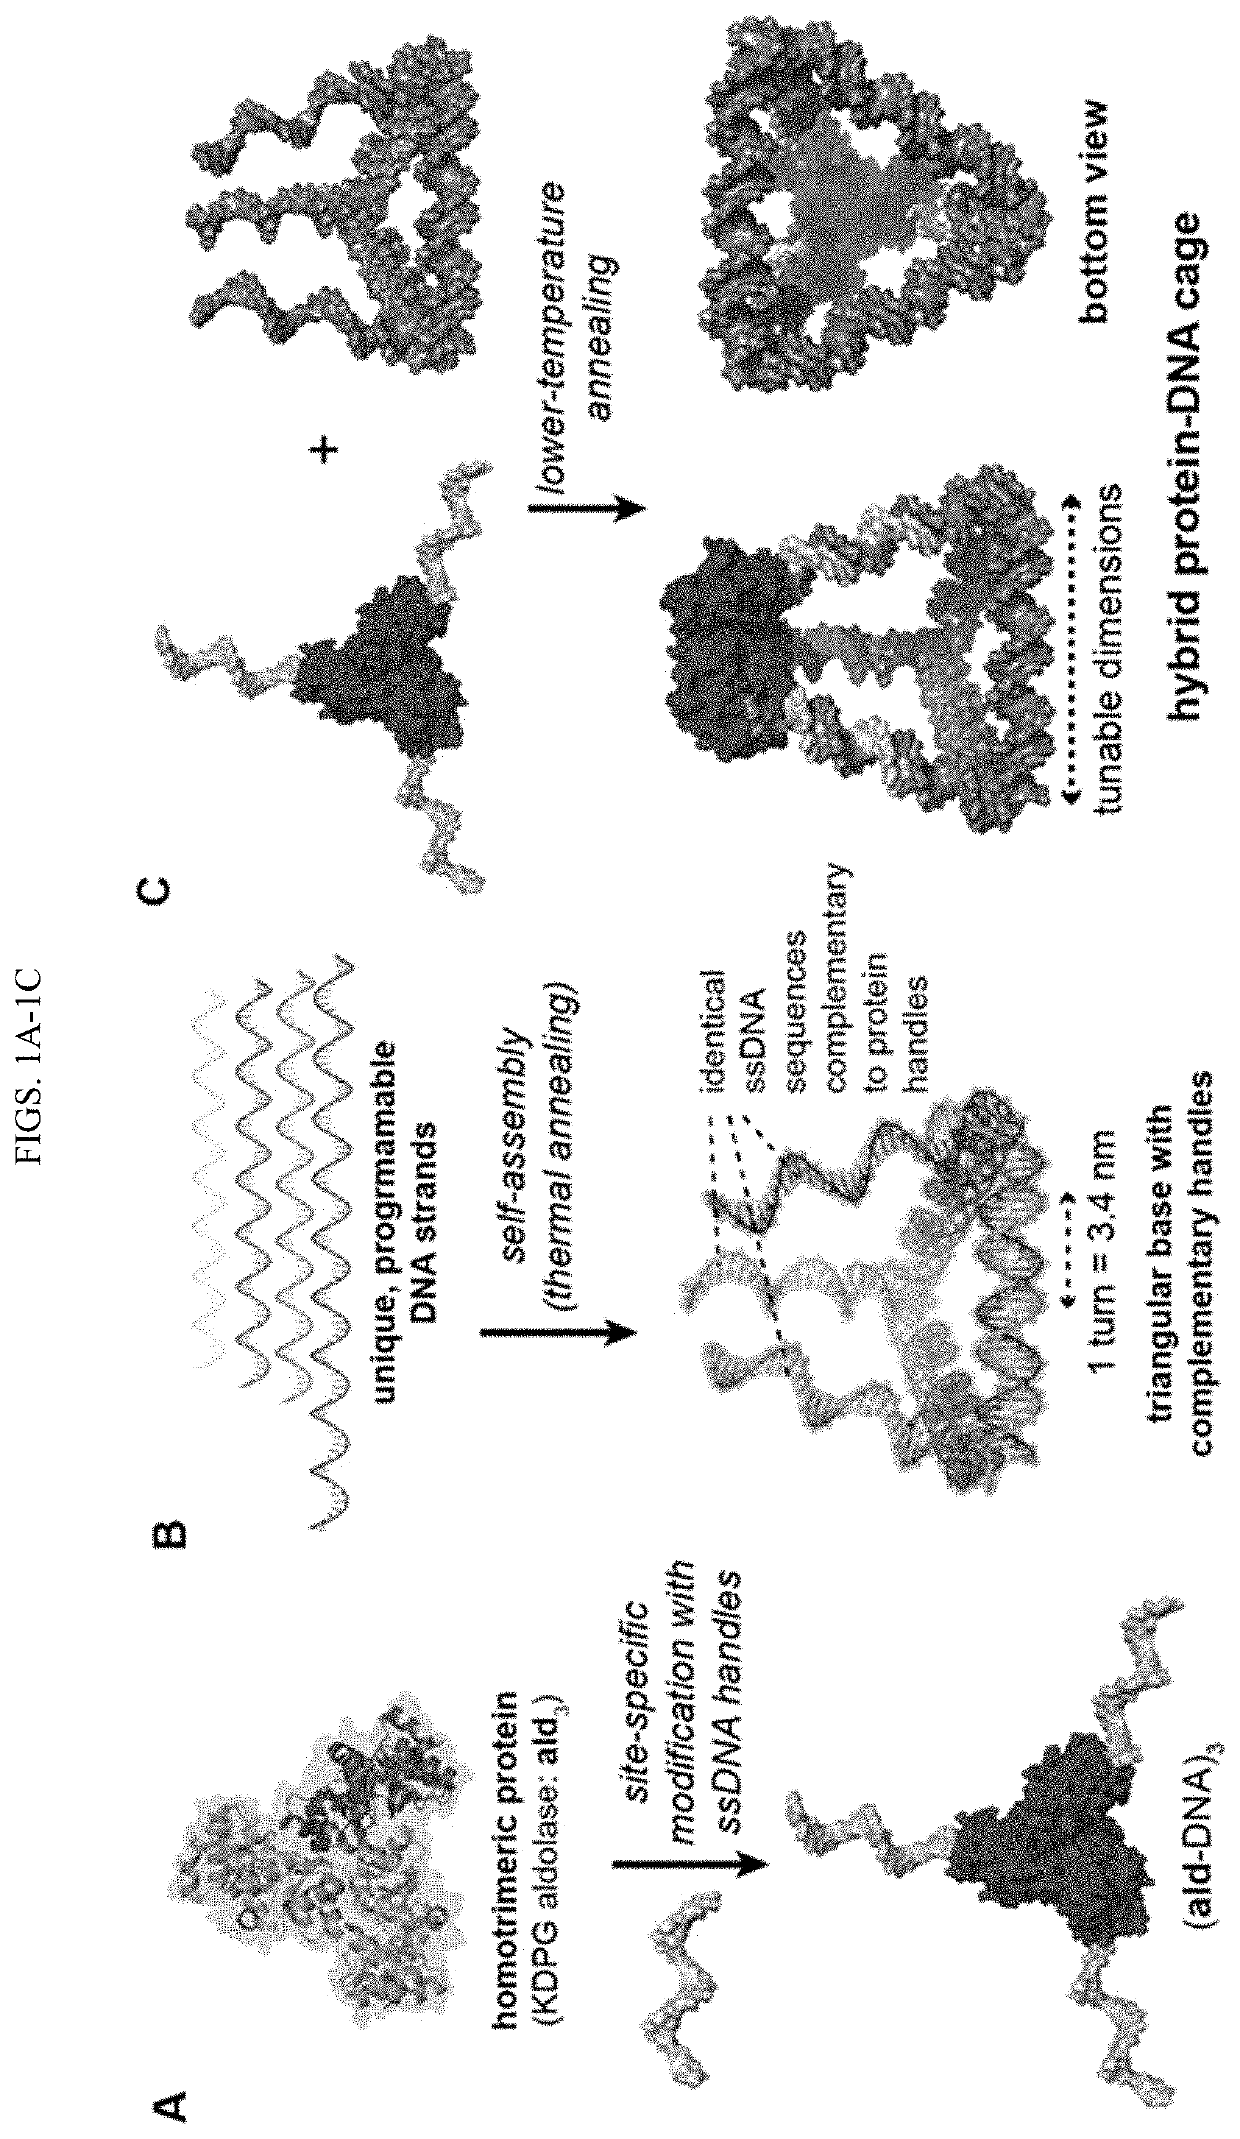 Tunable nanoscale cages from self-assembling DNA  and protein building blocks